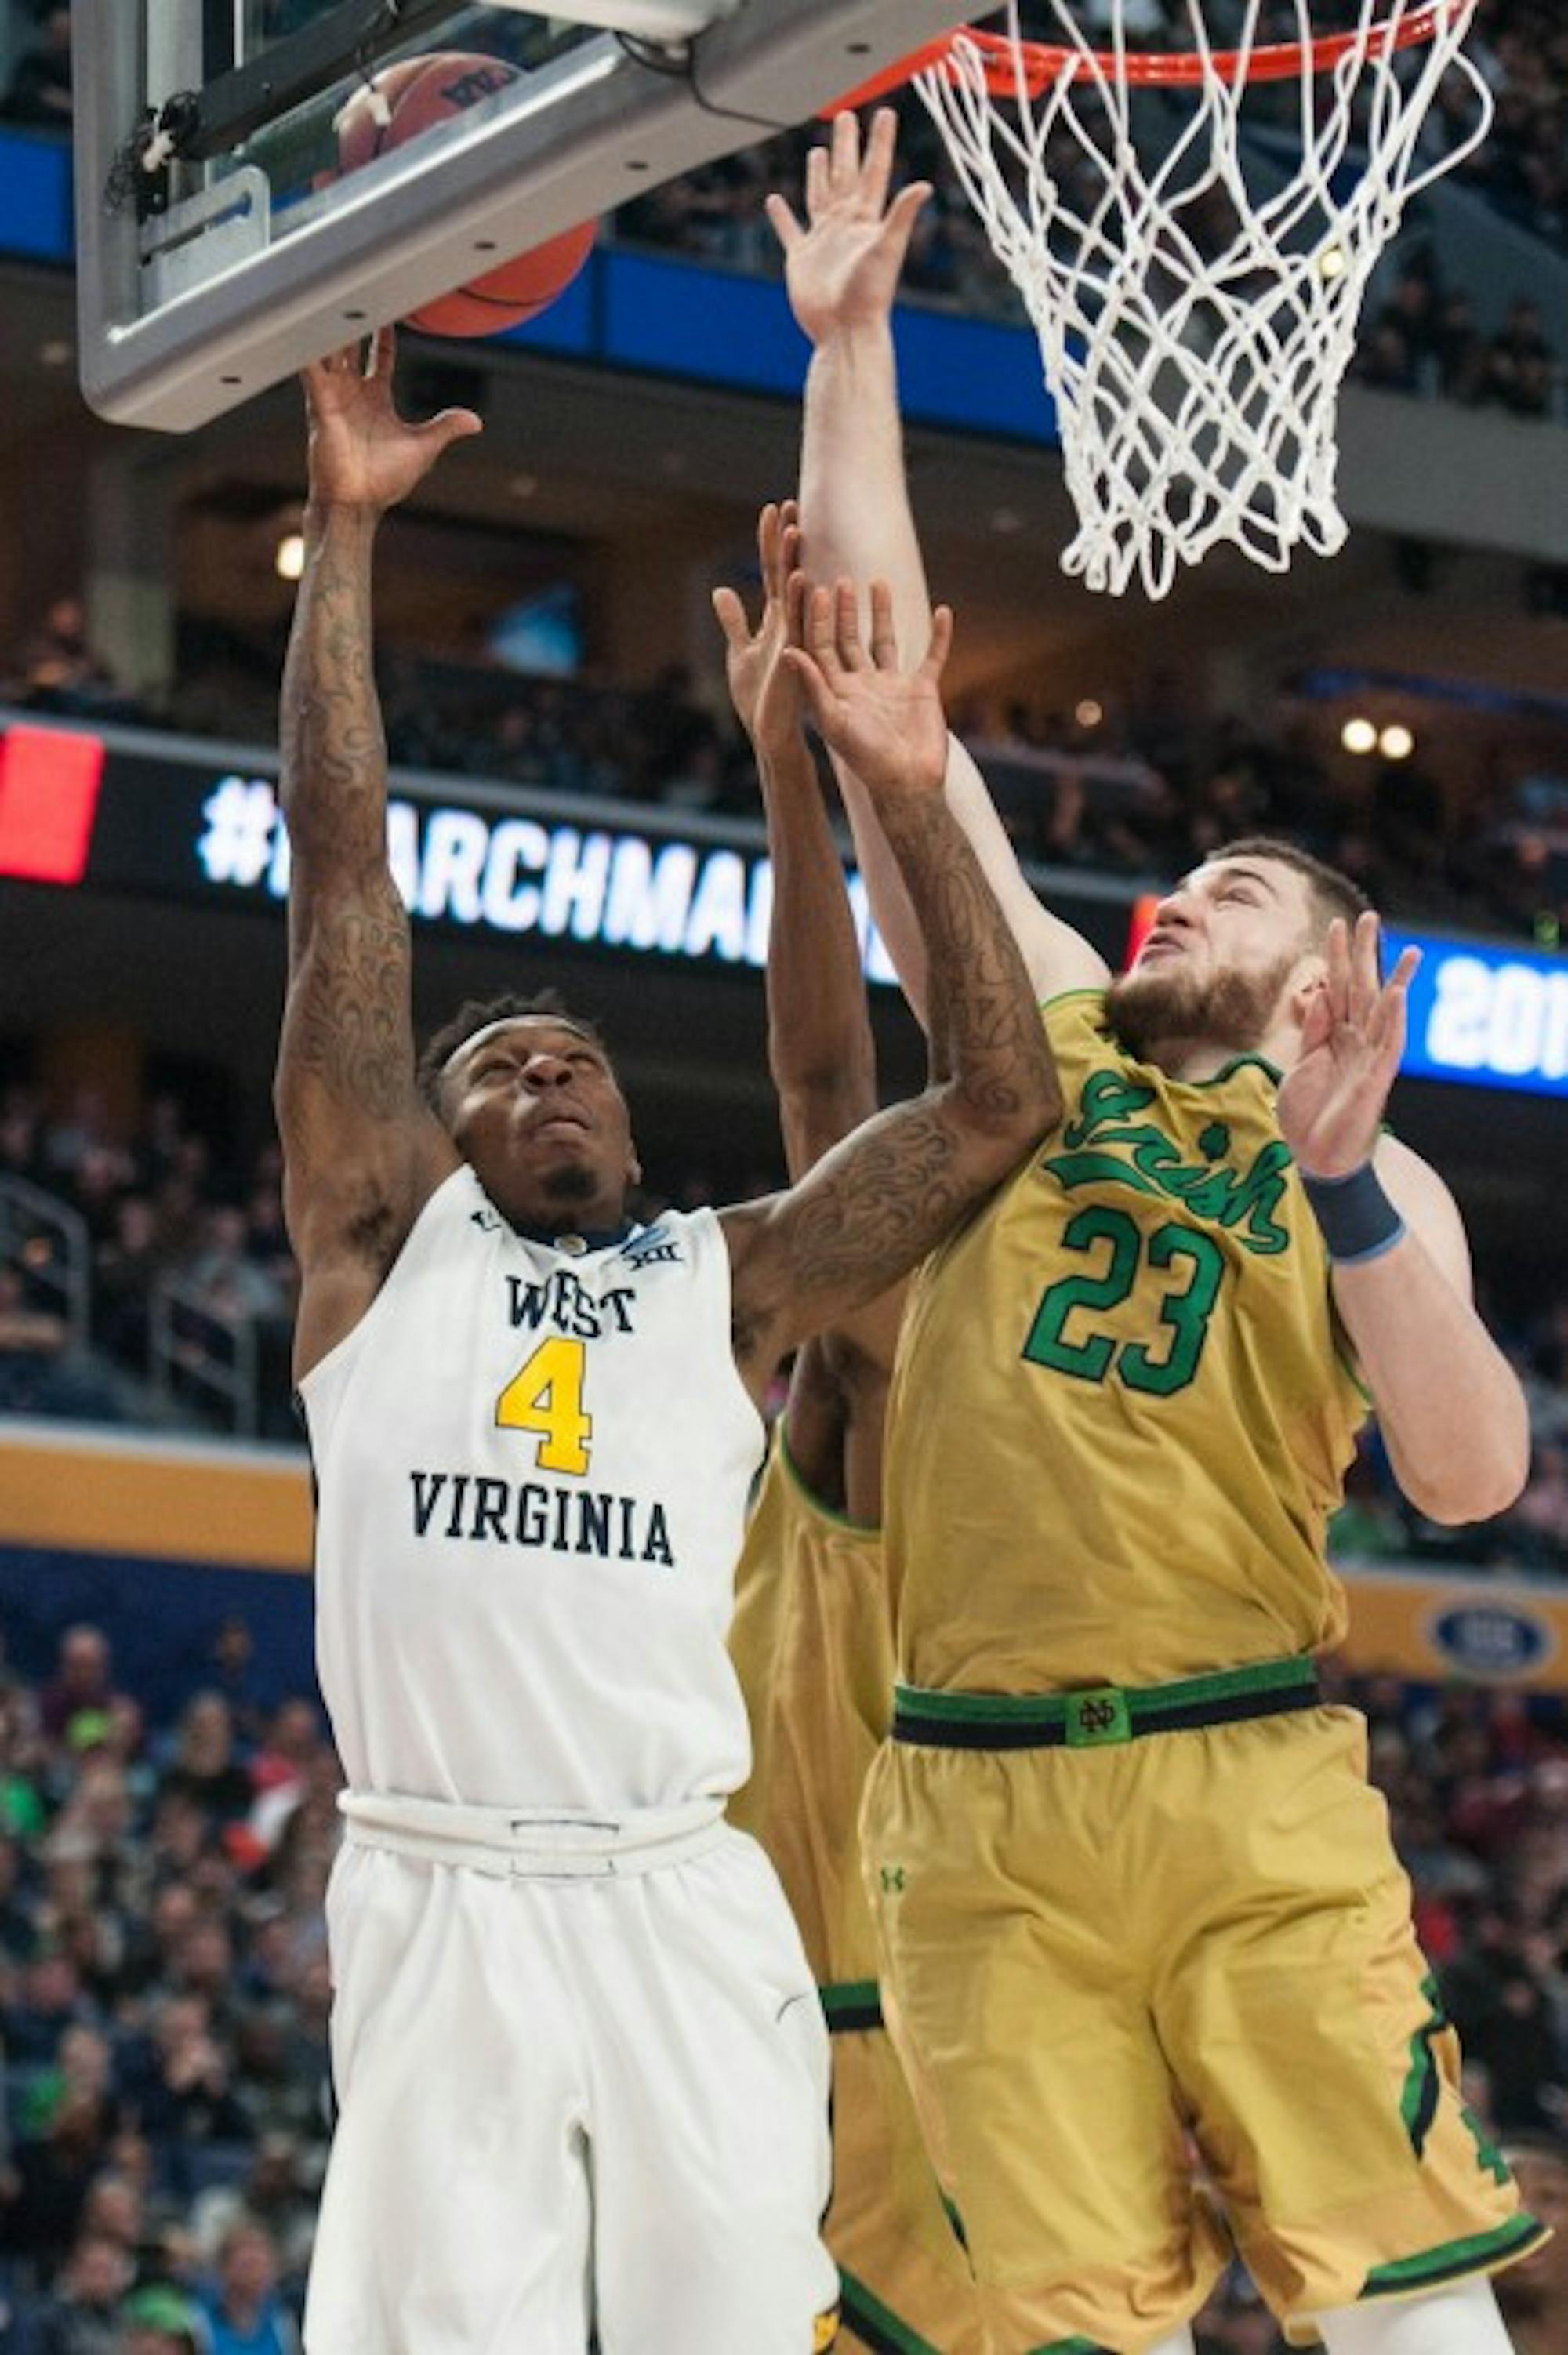 Irish junior forward Martinas Geben blocks a West Virginia player's shot during Notre Dame's 83-71 loss to the Mountaineers on Saturday at KeyBank Arena.